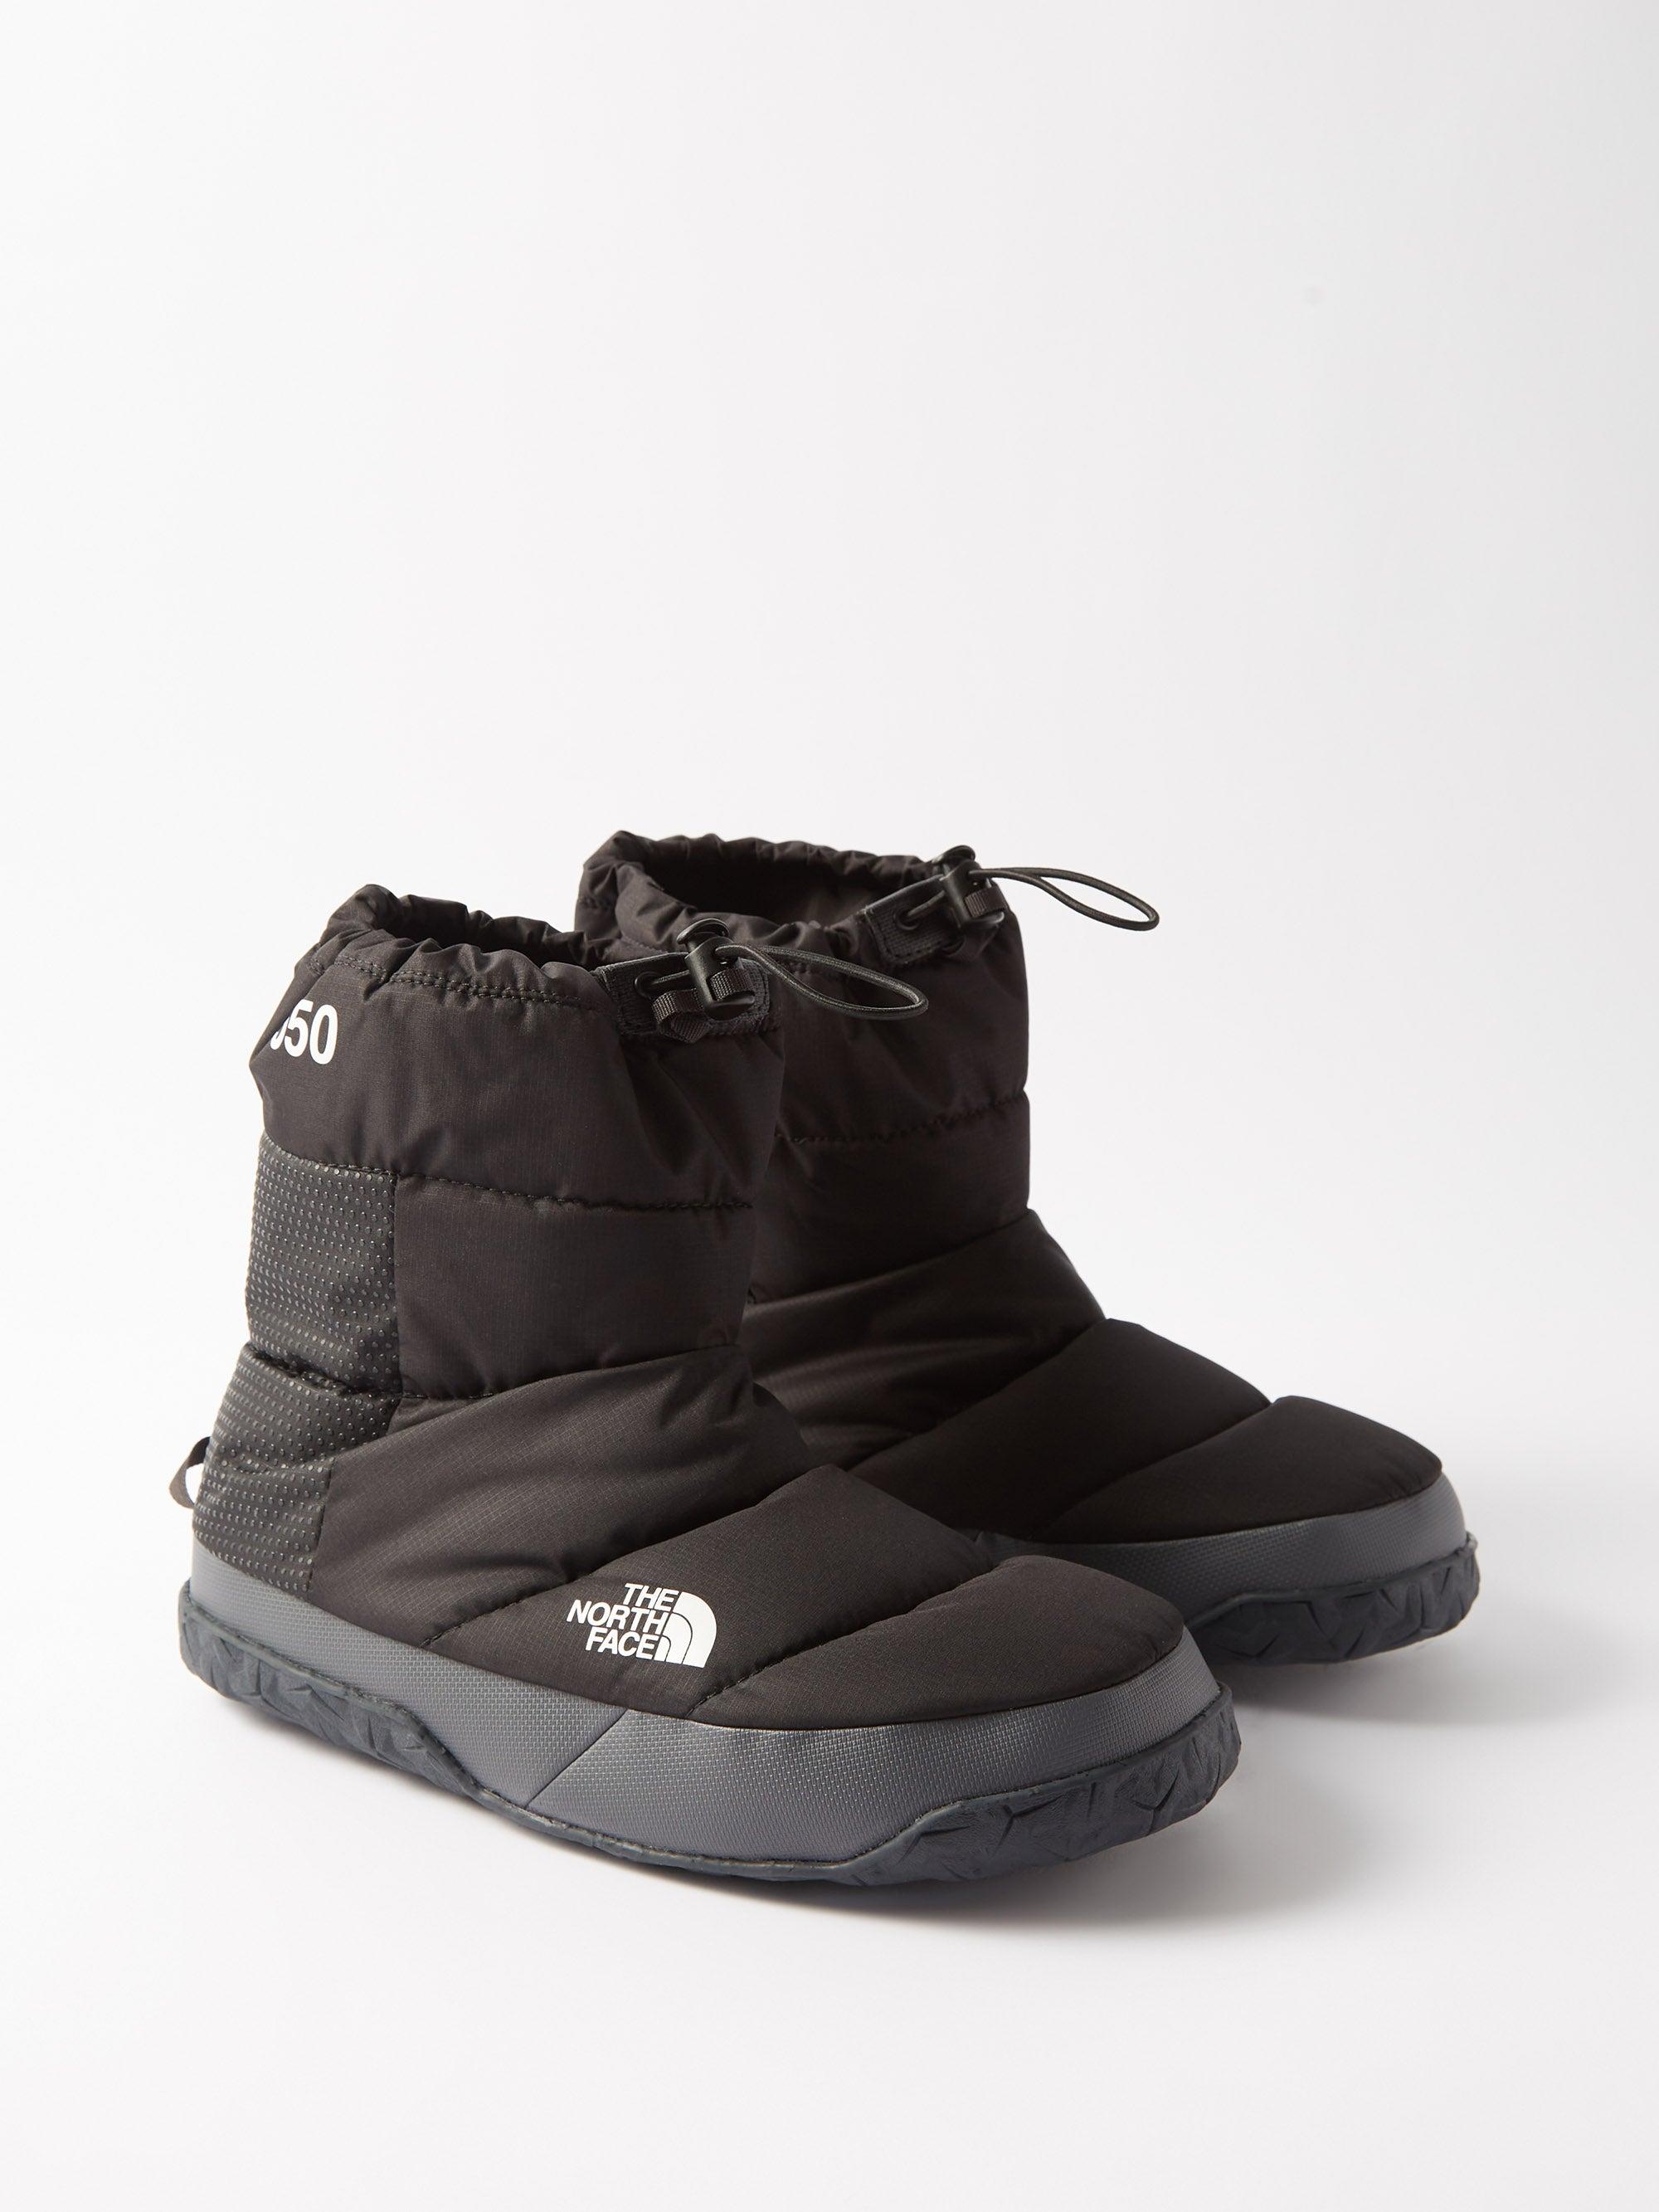 The North Face Nuptse Apres Down Insulated Booties in Black for 